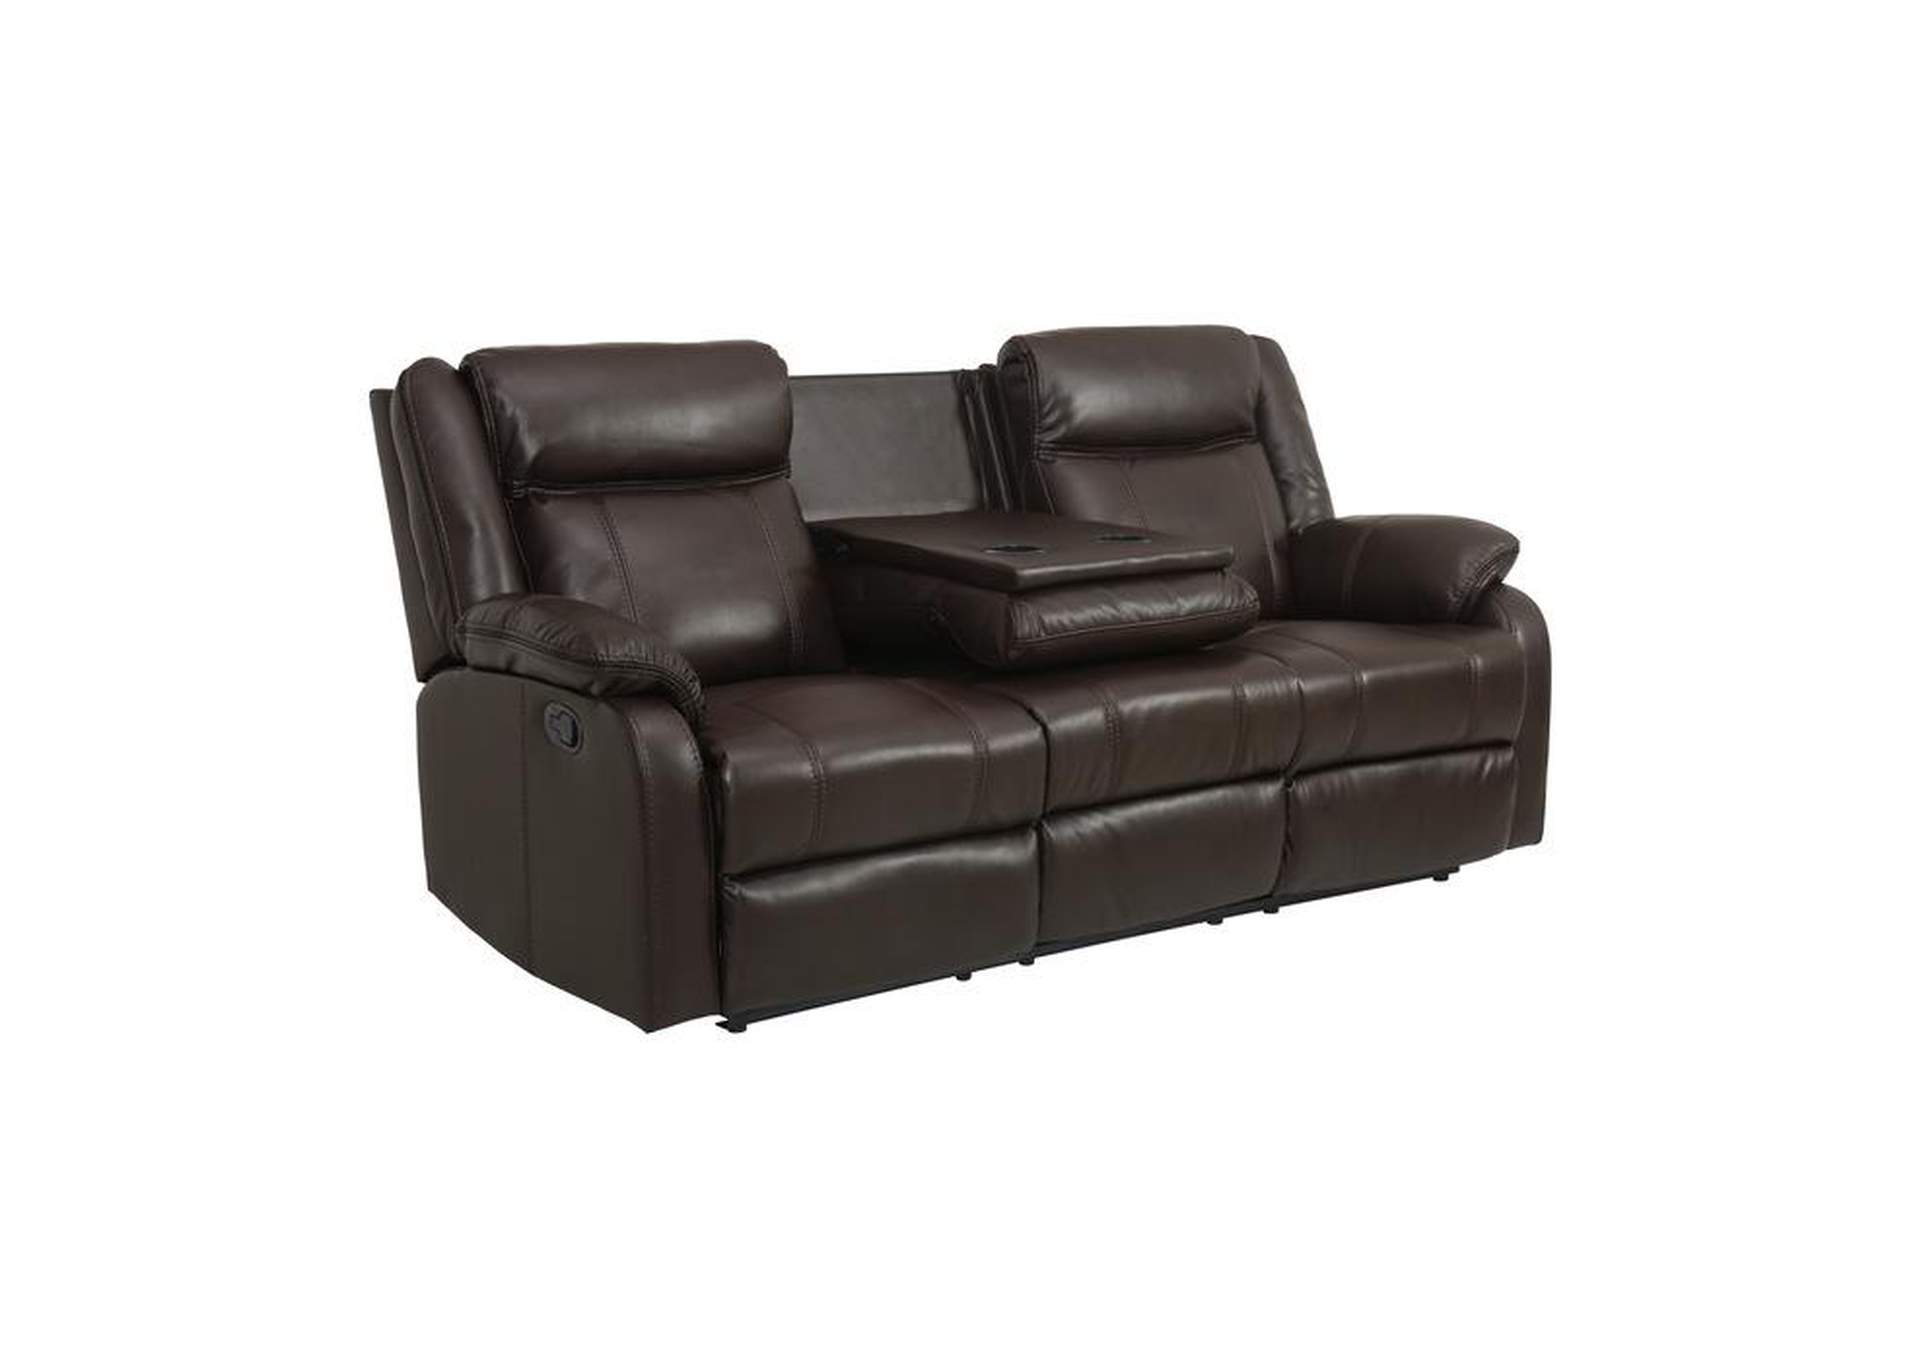 Jude Double Reclining Sofa With Center Drop-Down Cup Holders,Homelegance